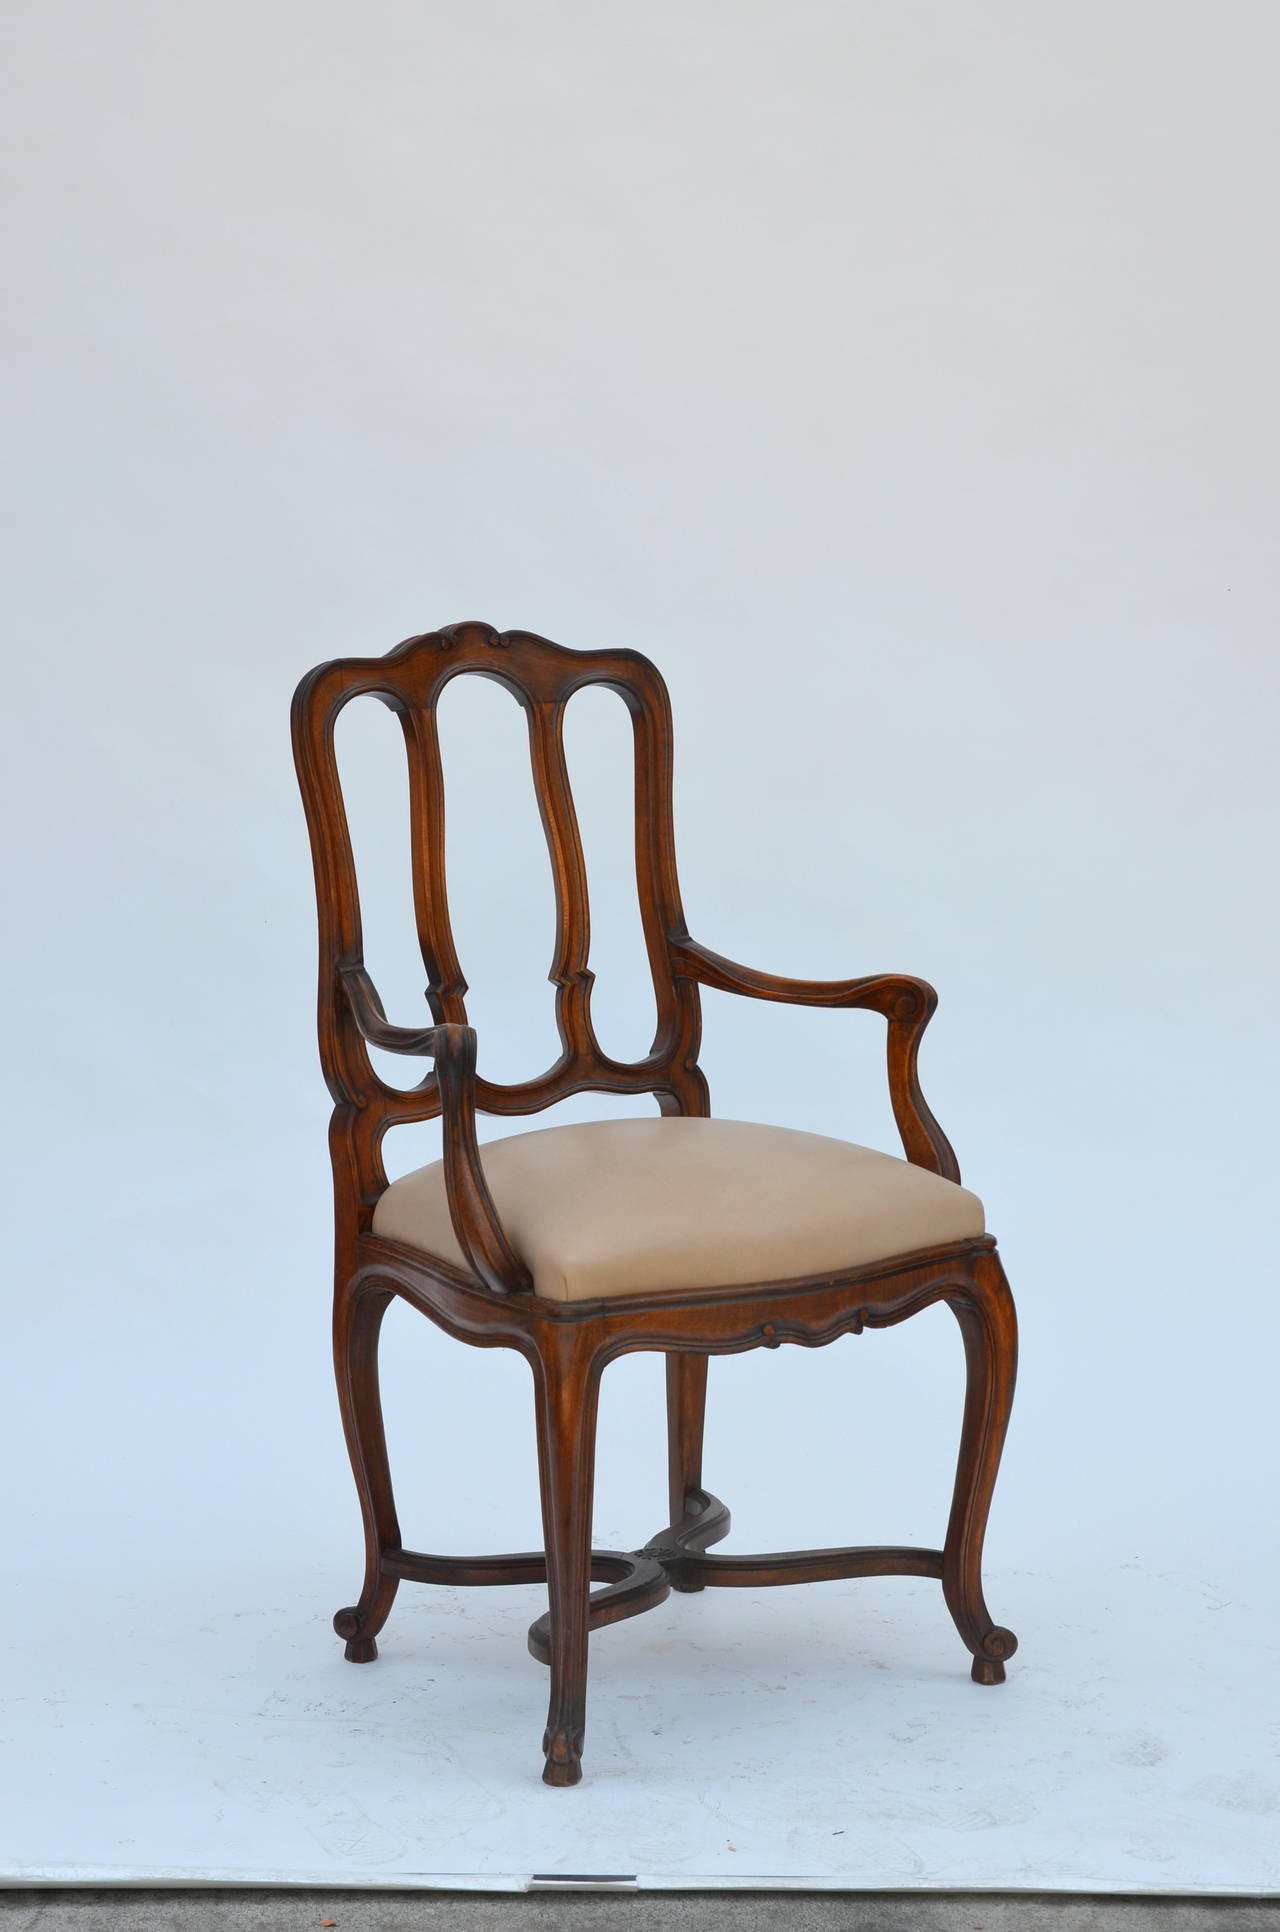 Impressive set of 12 chic French Louis XV style dining chairs and armchairs. Comfortable, sturdy design with new smooth natural leather seats.

Dimensions listed below with armchair arm height at 27 inches.